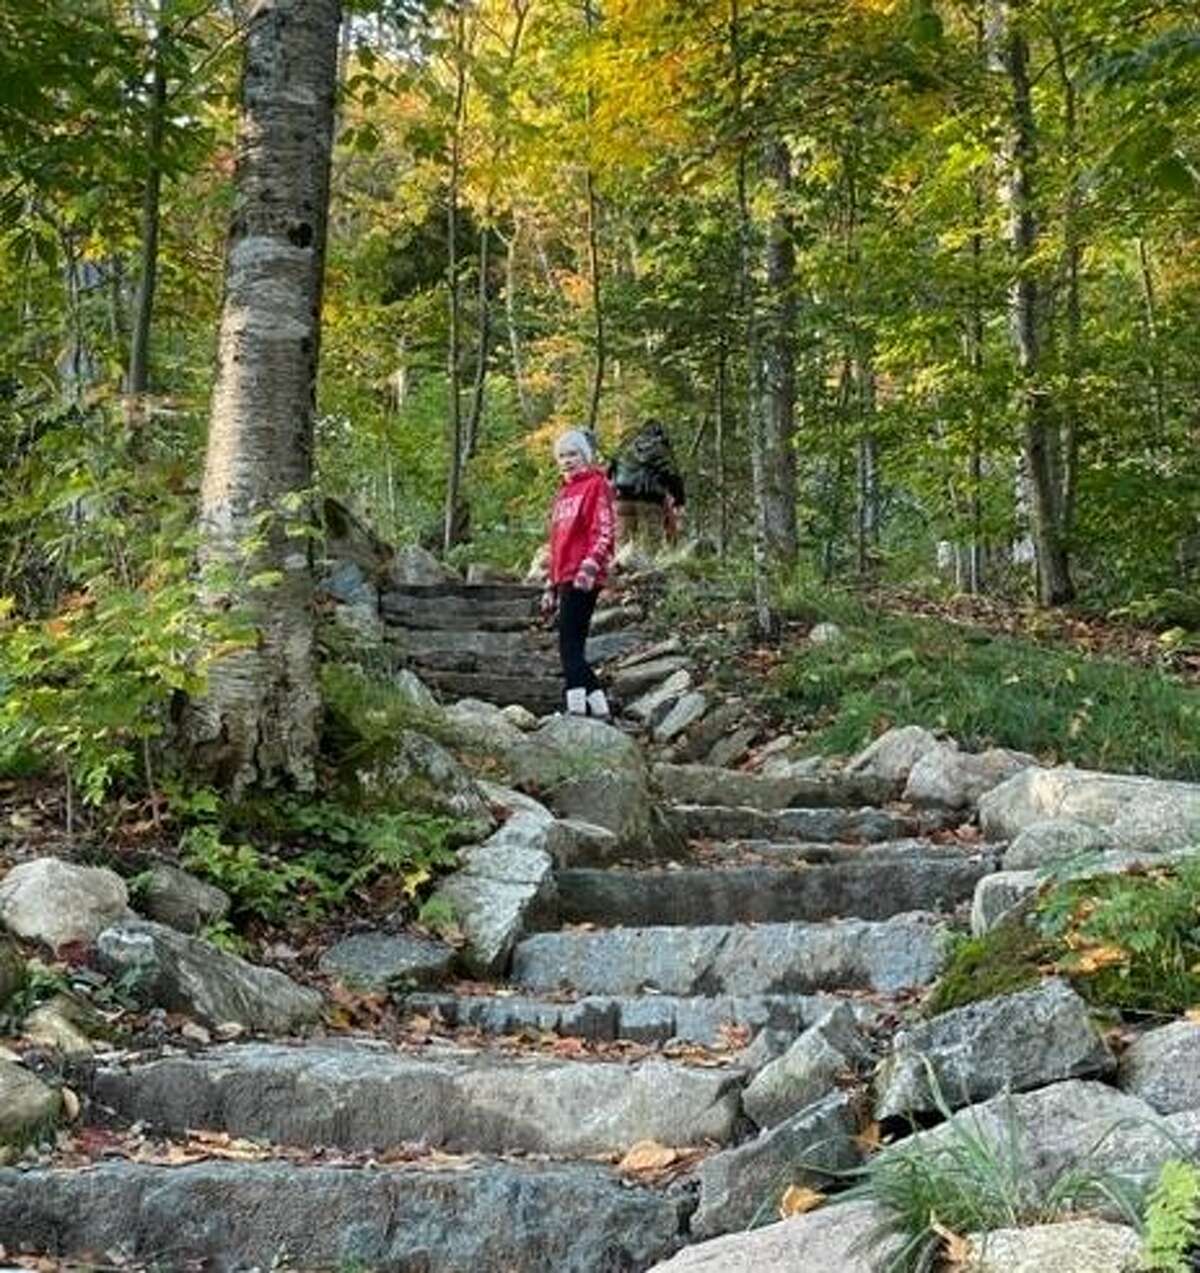 The Mt. Van Hoevenberg trail has staircase-like rock structures to facilitate climbing and combat erosion.